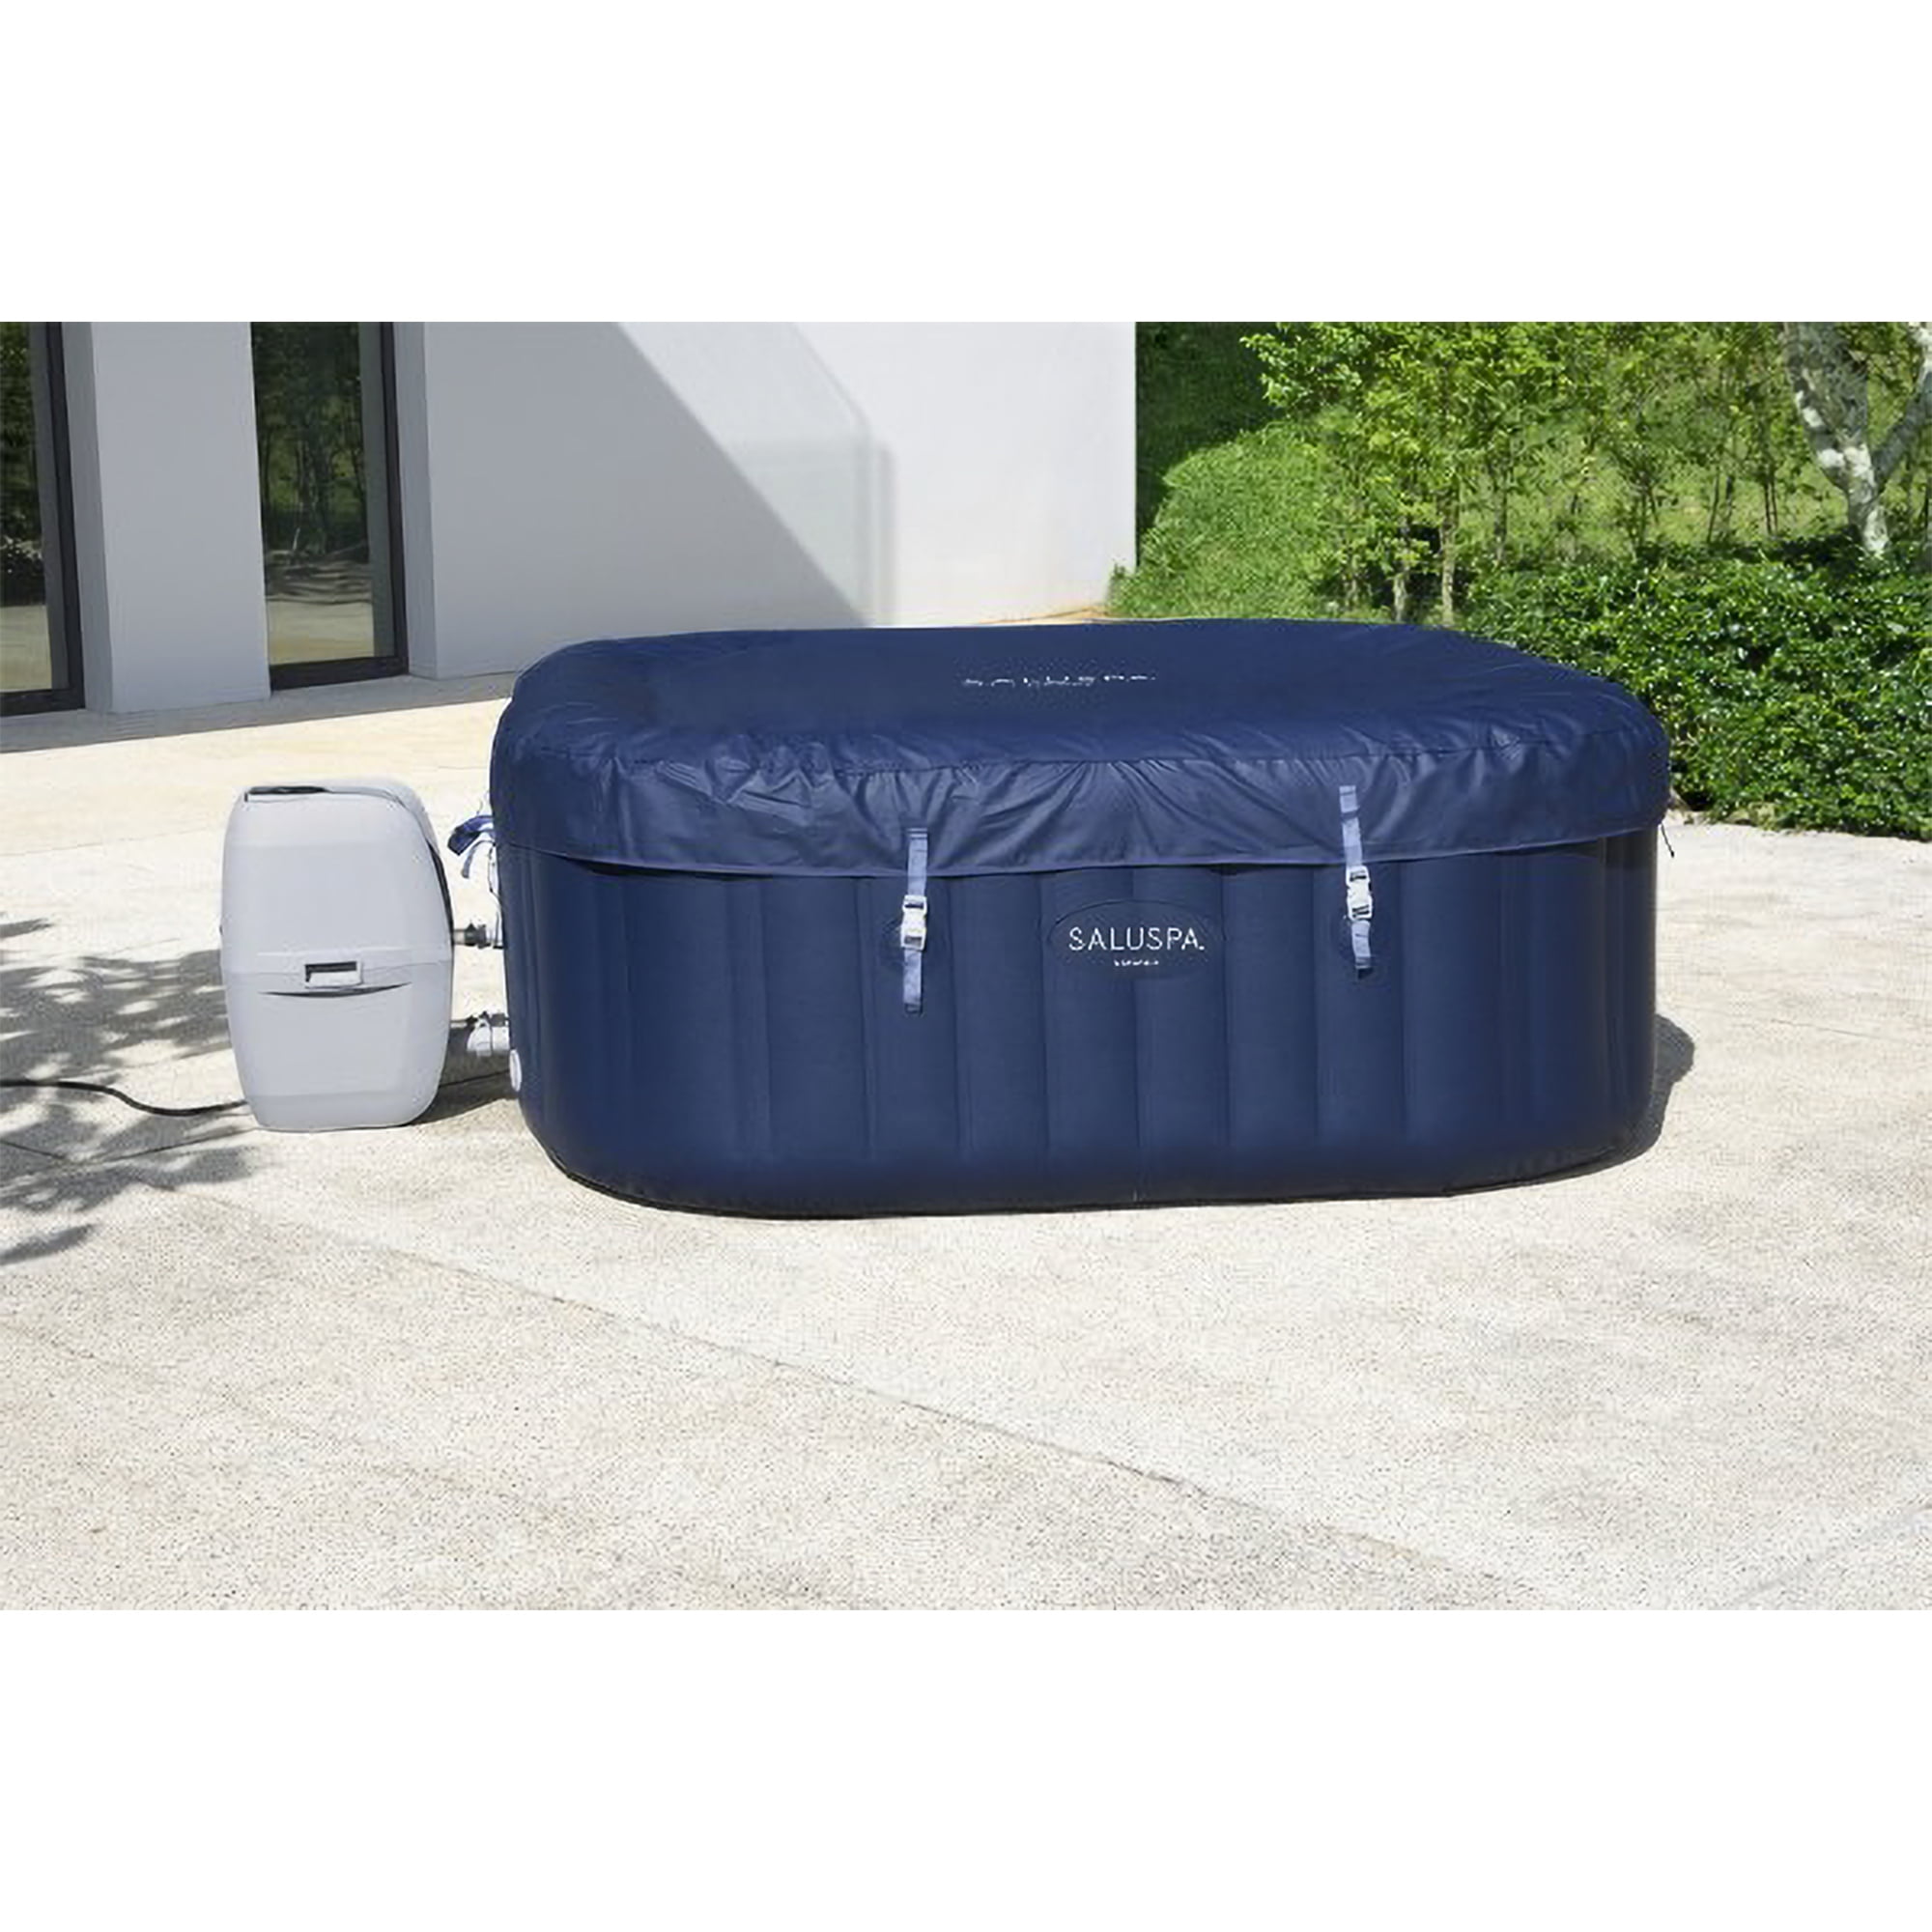 Hot Inflatable with Tub Blue AirJet Bestway SaluSpa Jets, 114 Hawaii